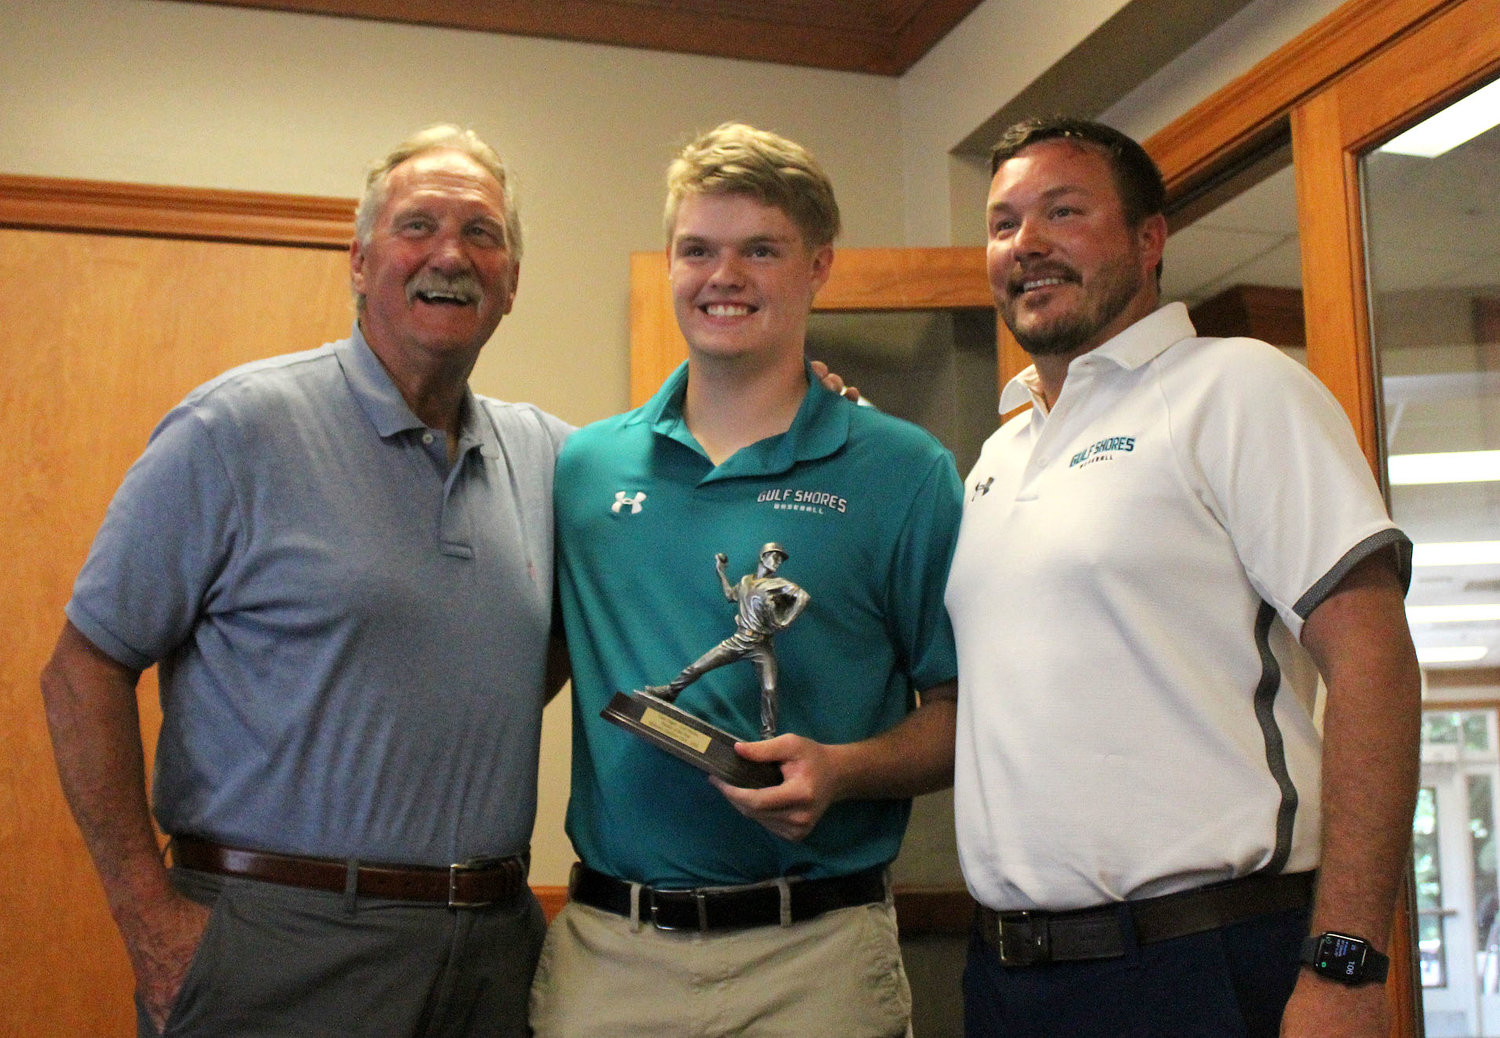 Gulf Shores’ Case Hager was named the Midtown Optimist Club Baldwin County Pitcher of the Year. He was presented the trophy by guest speaker and Mobile Sports Hall of Famer Randy McGilberry at the Azalea City Golf Club May 25. He was joined by Dolphin Head Coach Chris Jacks.